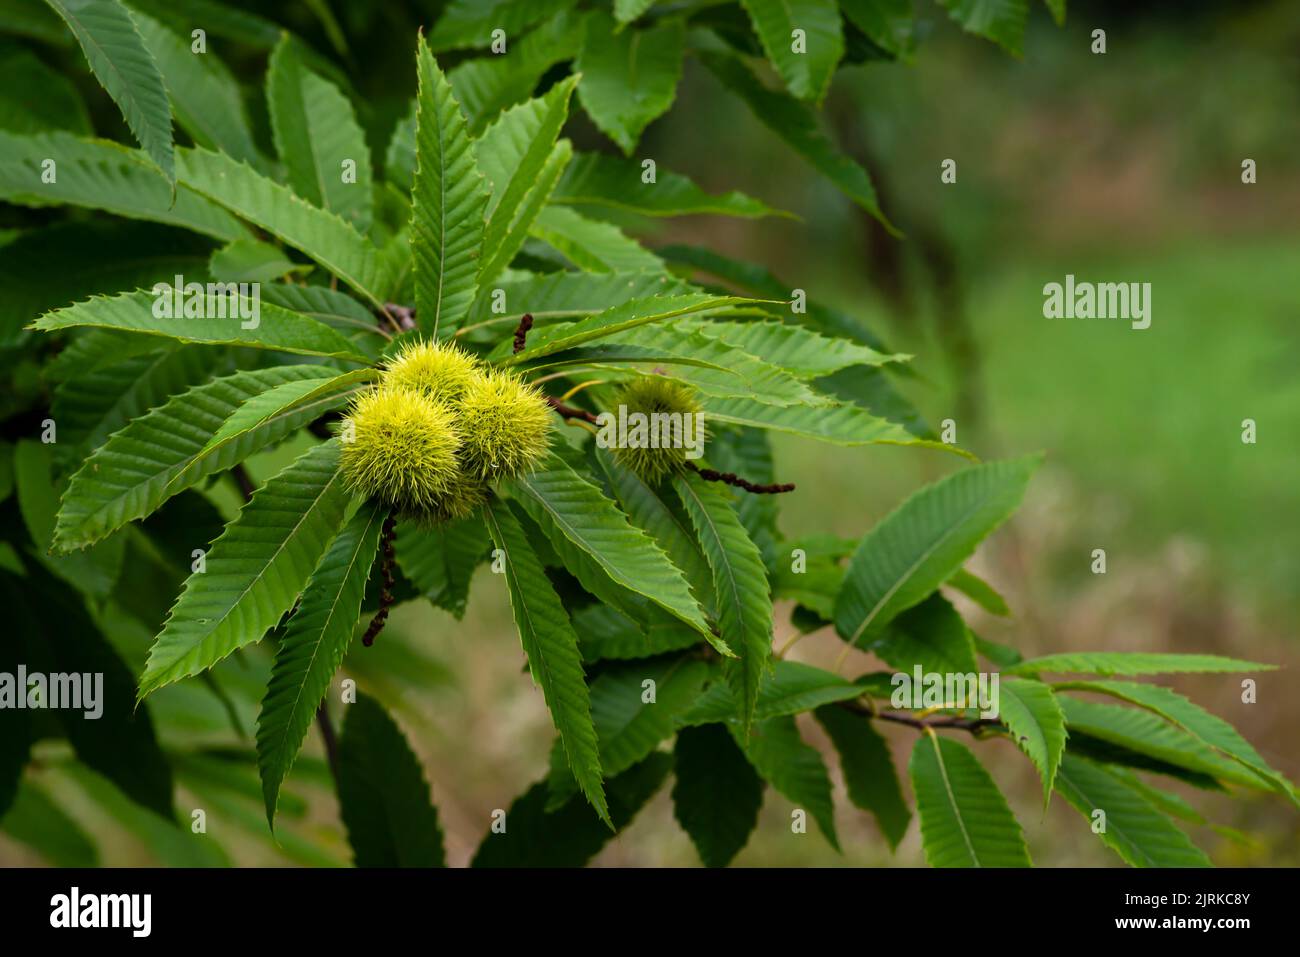 growing Castanea sativa ripening tasty edible fruits in spiny cupules, edible hidden seed nuts hanging on tree branches, green leaves Spanish Moldova Stock Photo